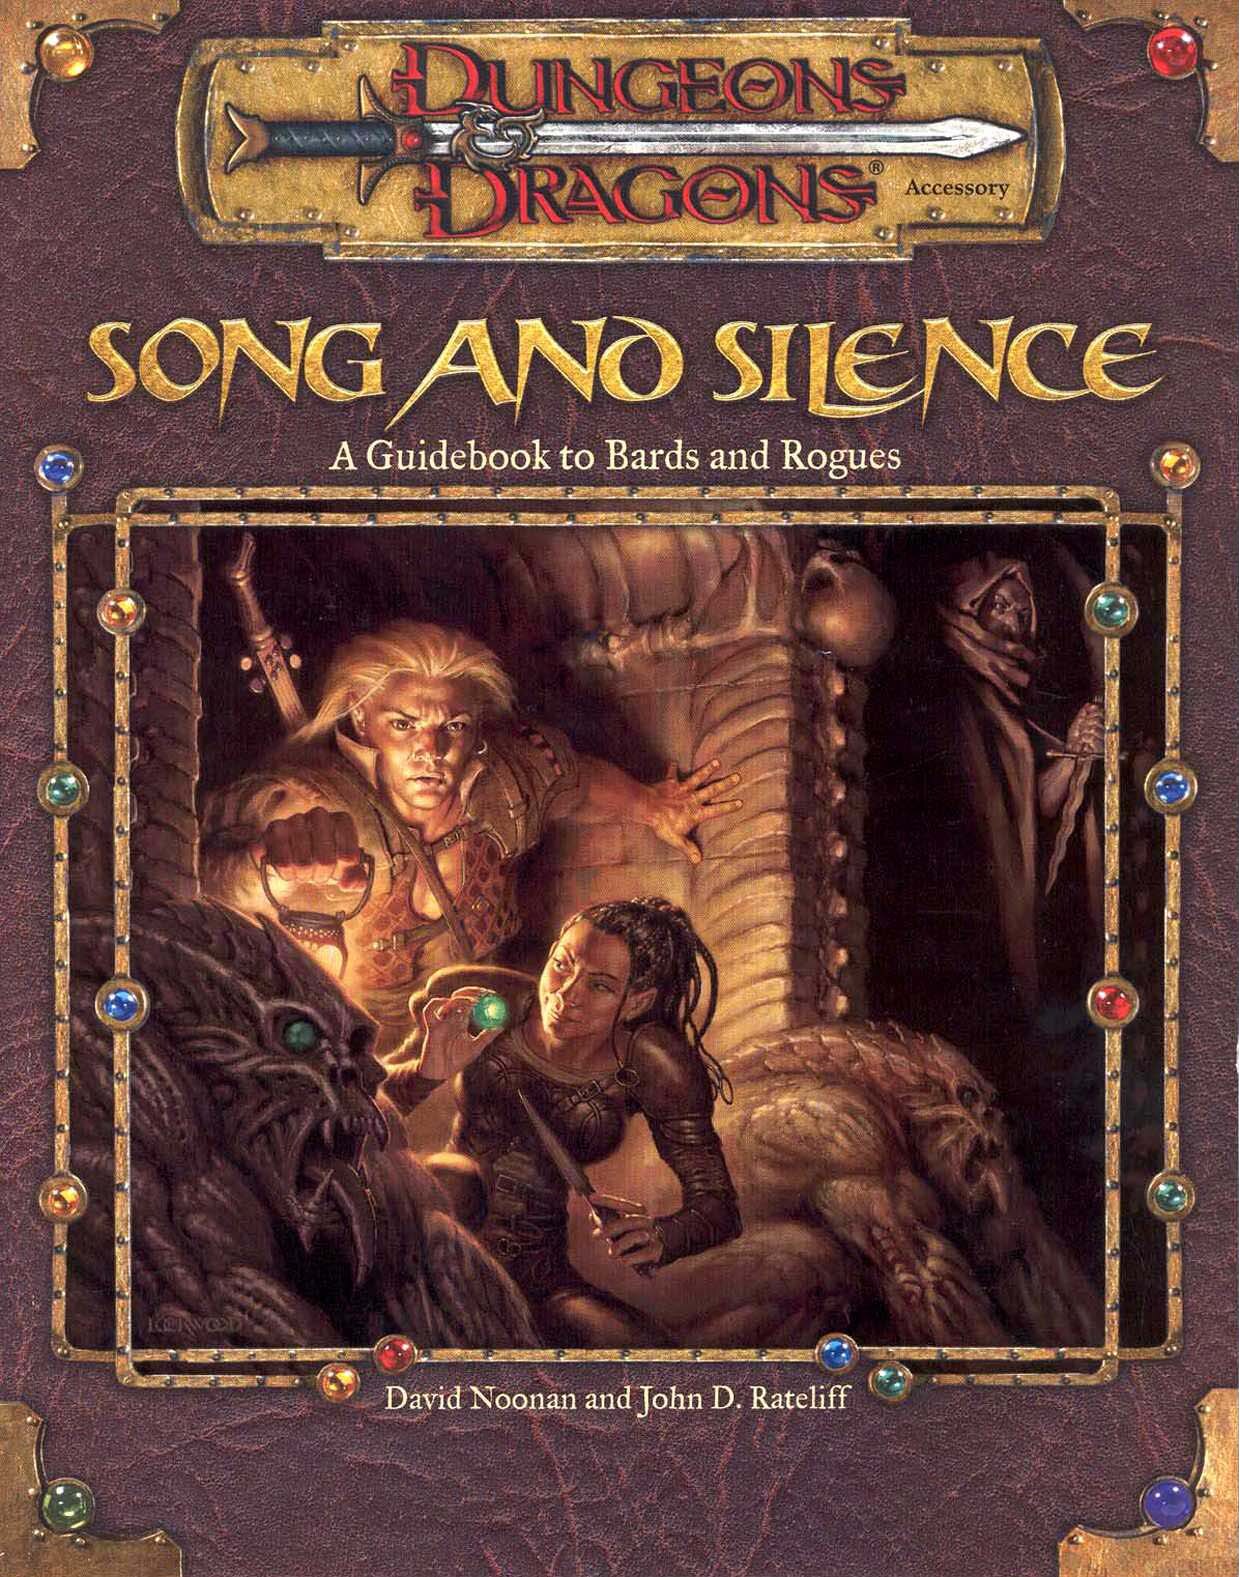 Song and Silence: A Guidebook to Bards and Rogues